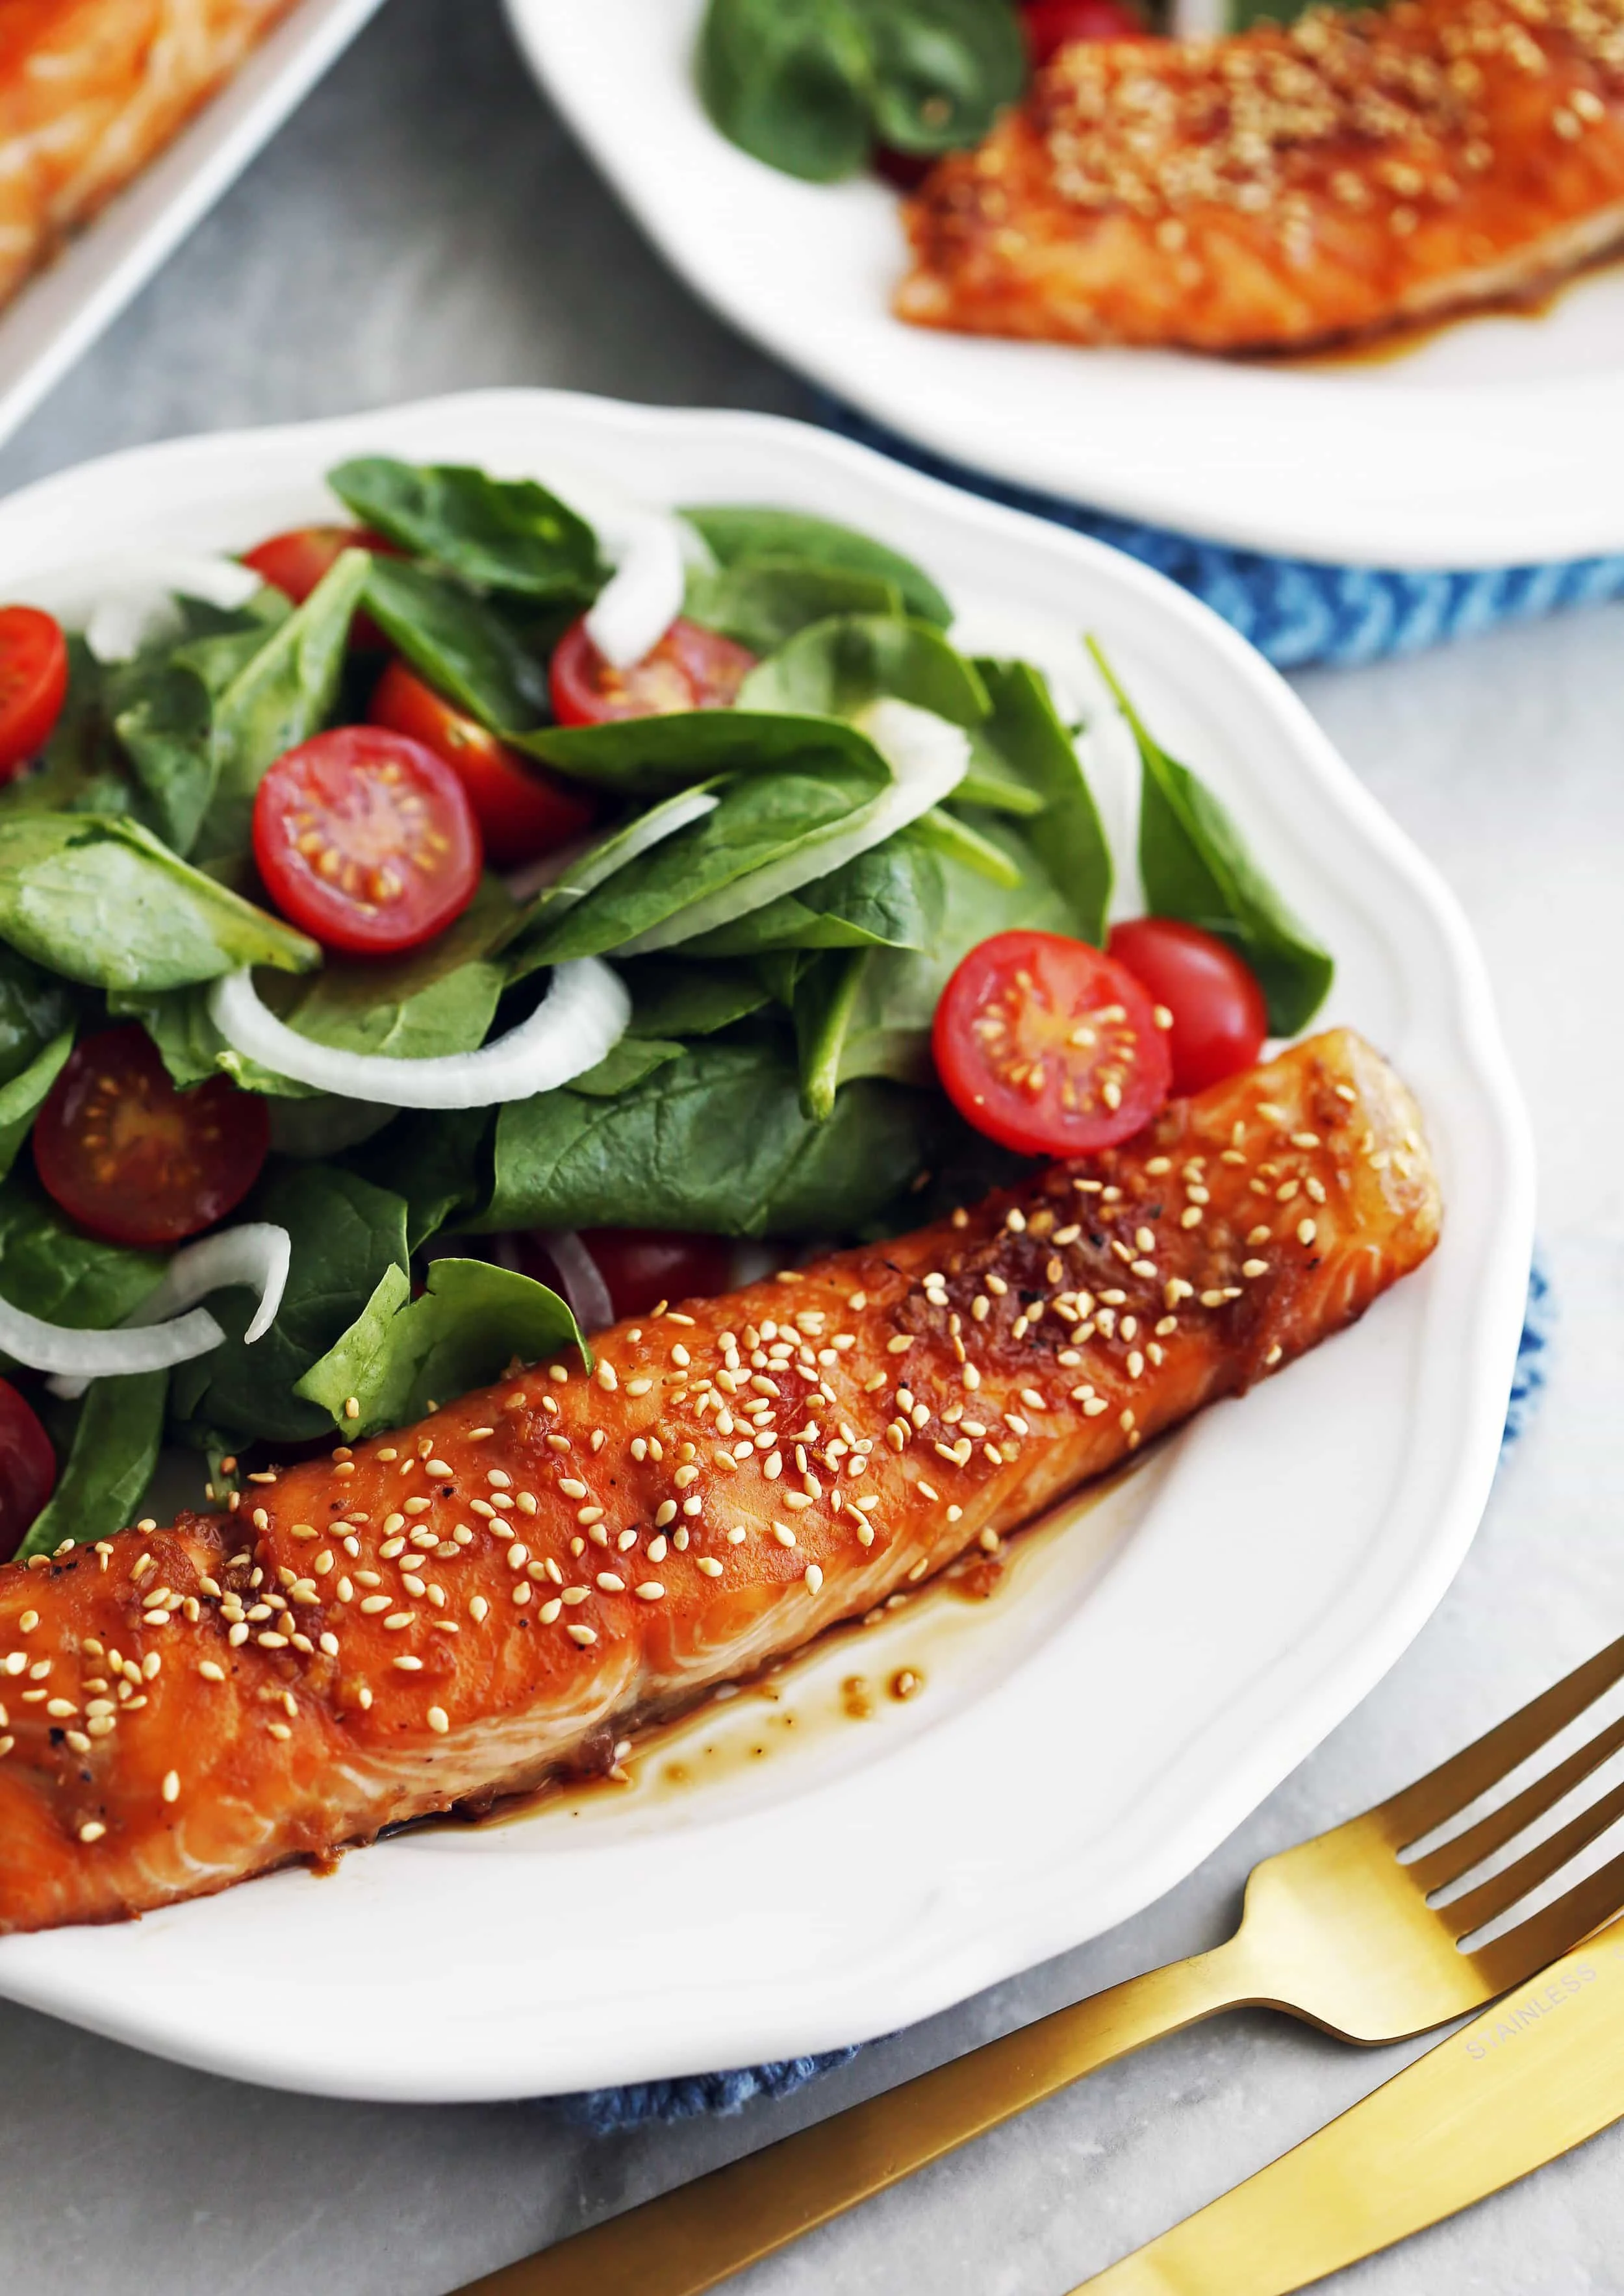 Maple-Soy Baked Salmon with green spinach salad on a white plate with a fork and knife beside it.